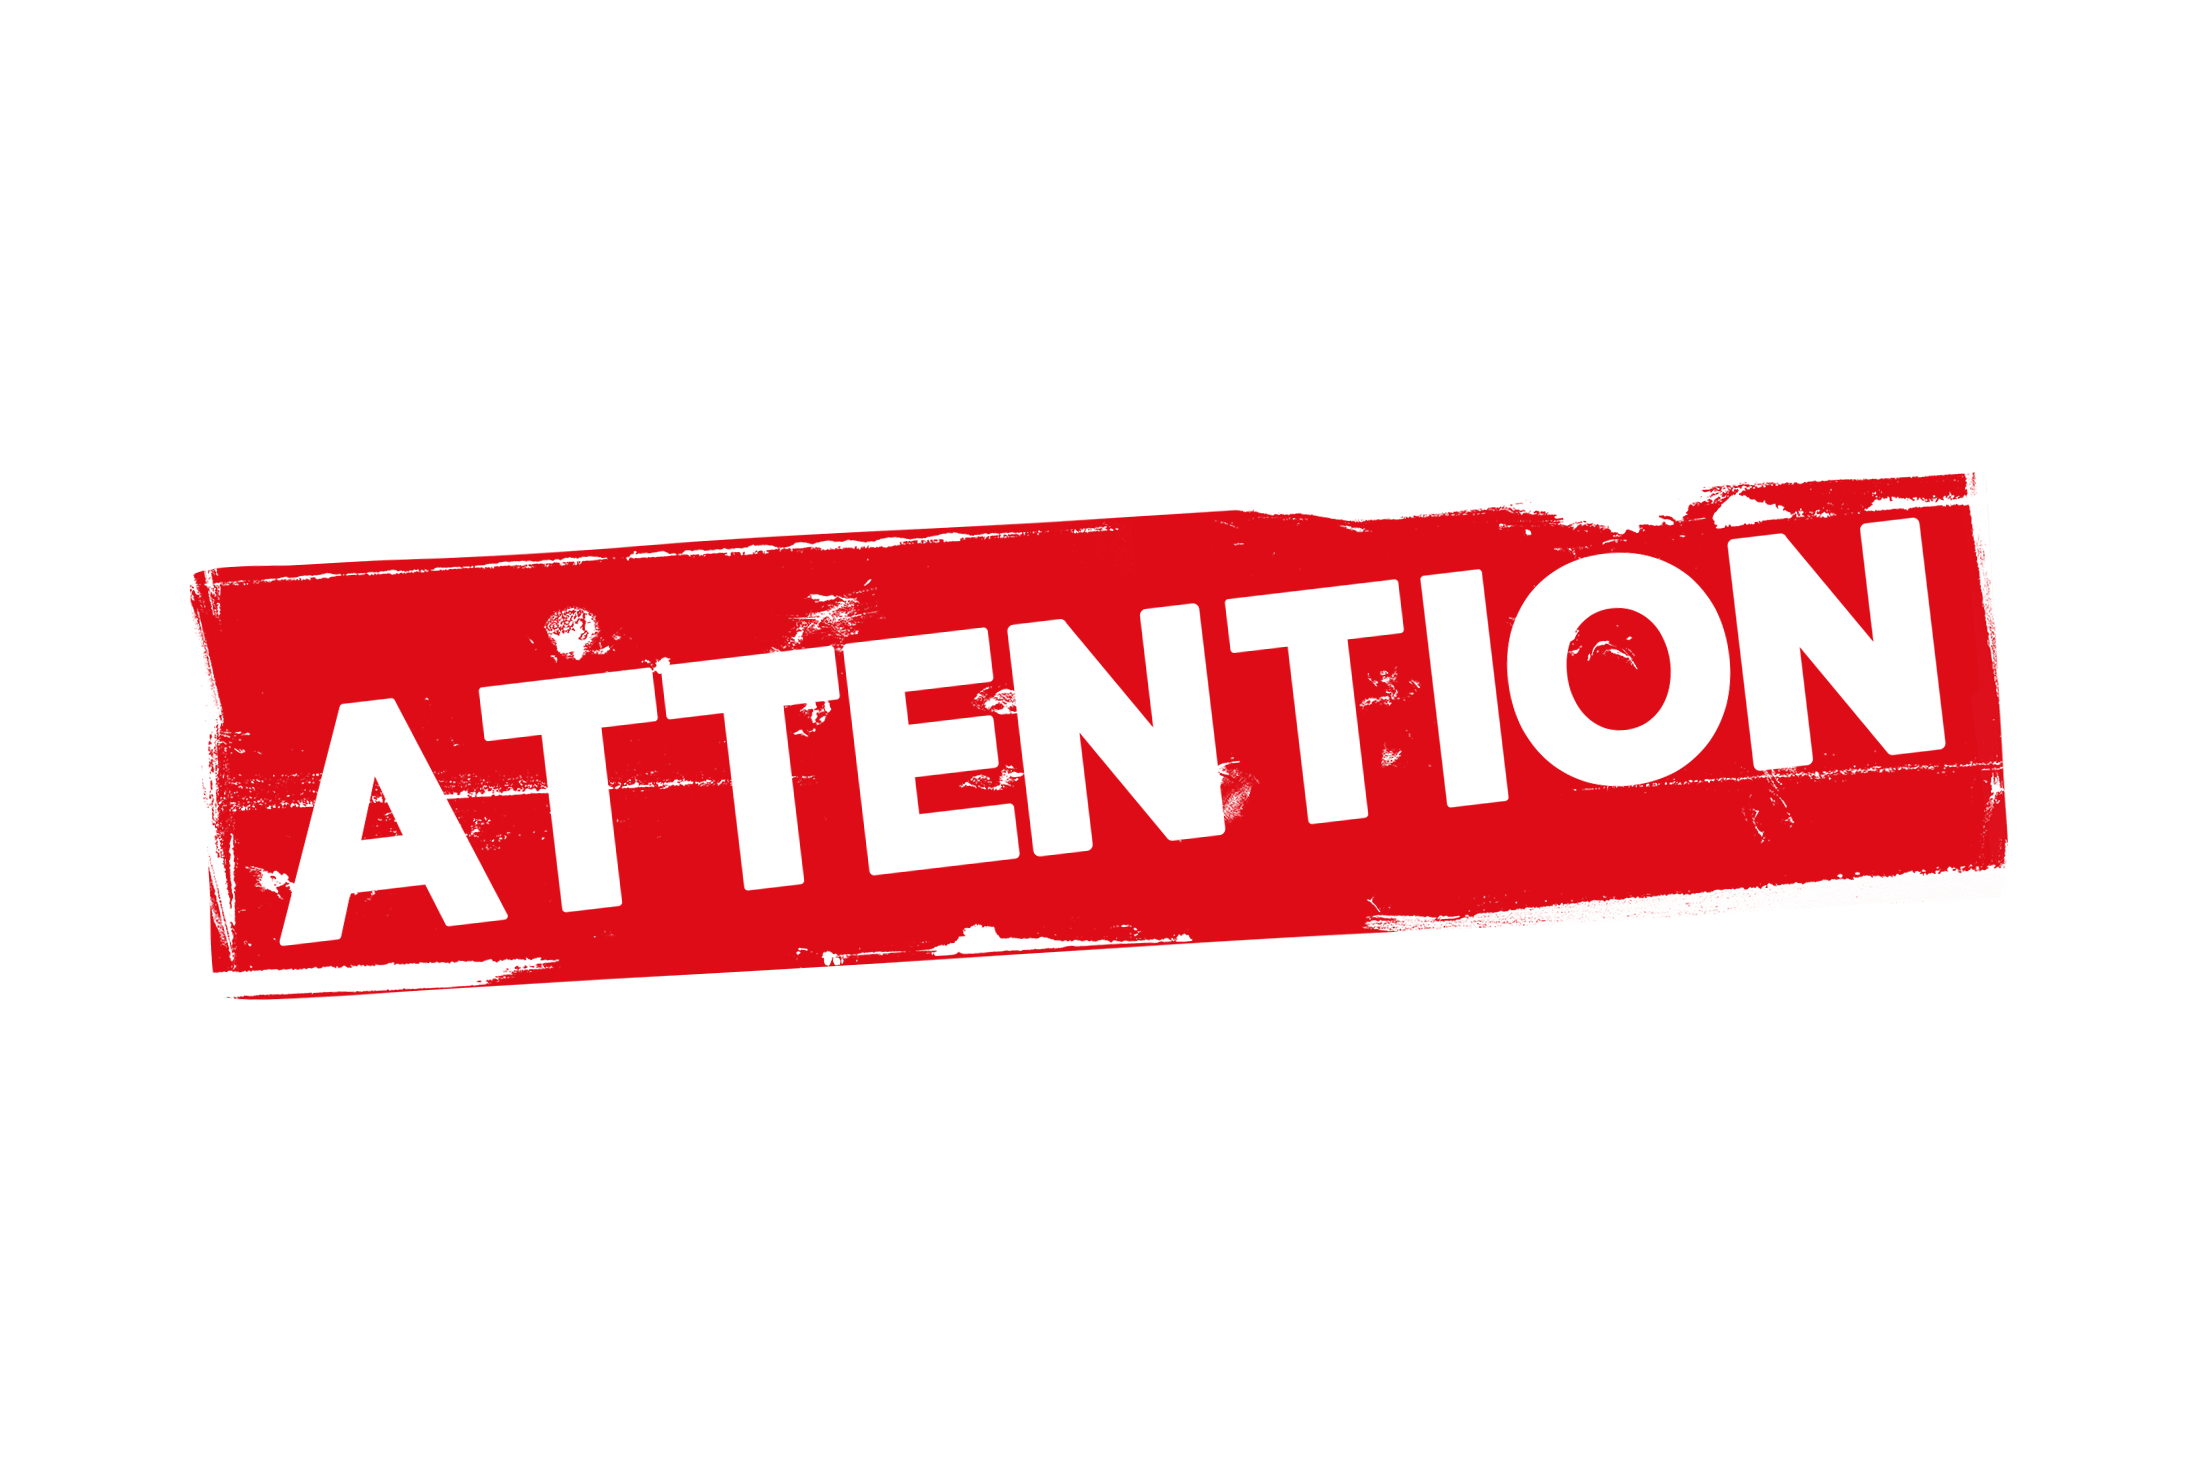 Attention PNG File